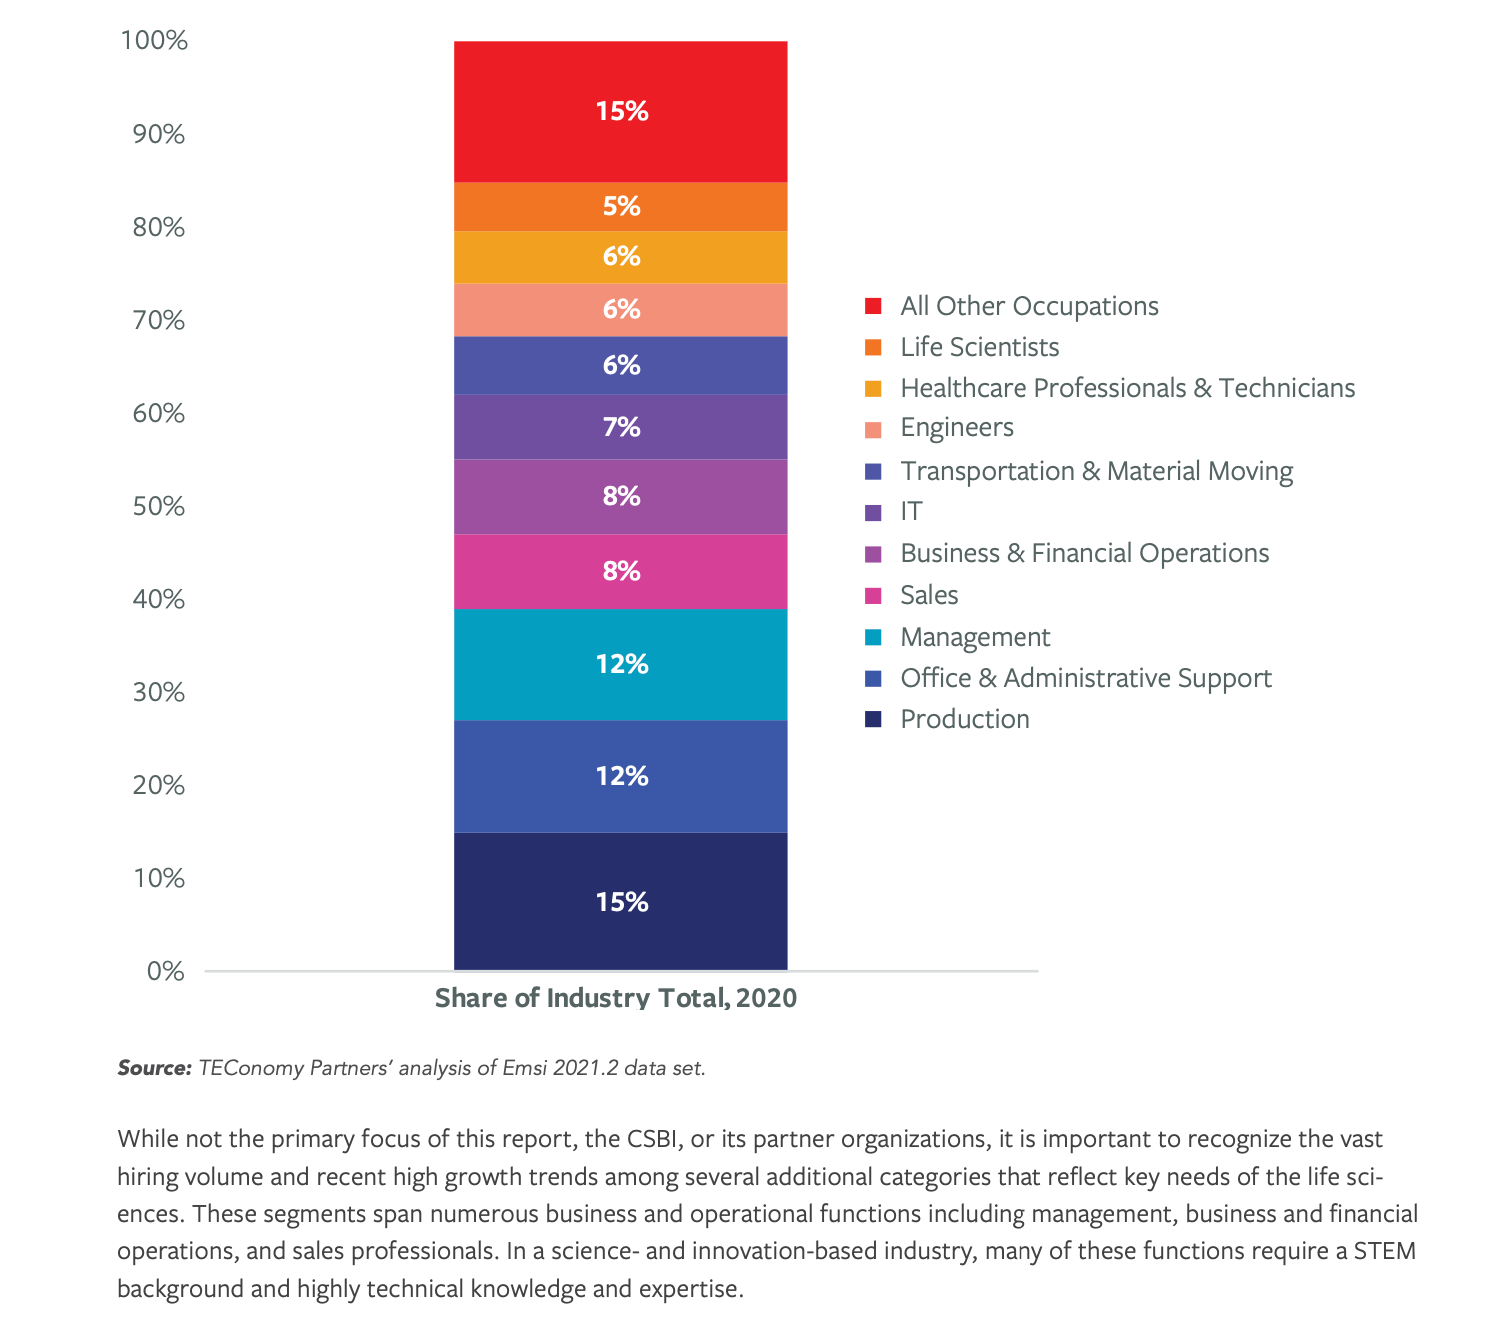 Figure 1. TEConomy used government and market data to analyze the mix of employment types in the life sciences. Source: TEConomy 2021 Life Sciences Workforce Trends Report.